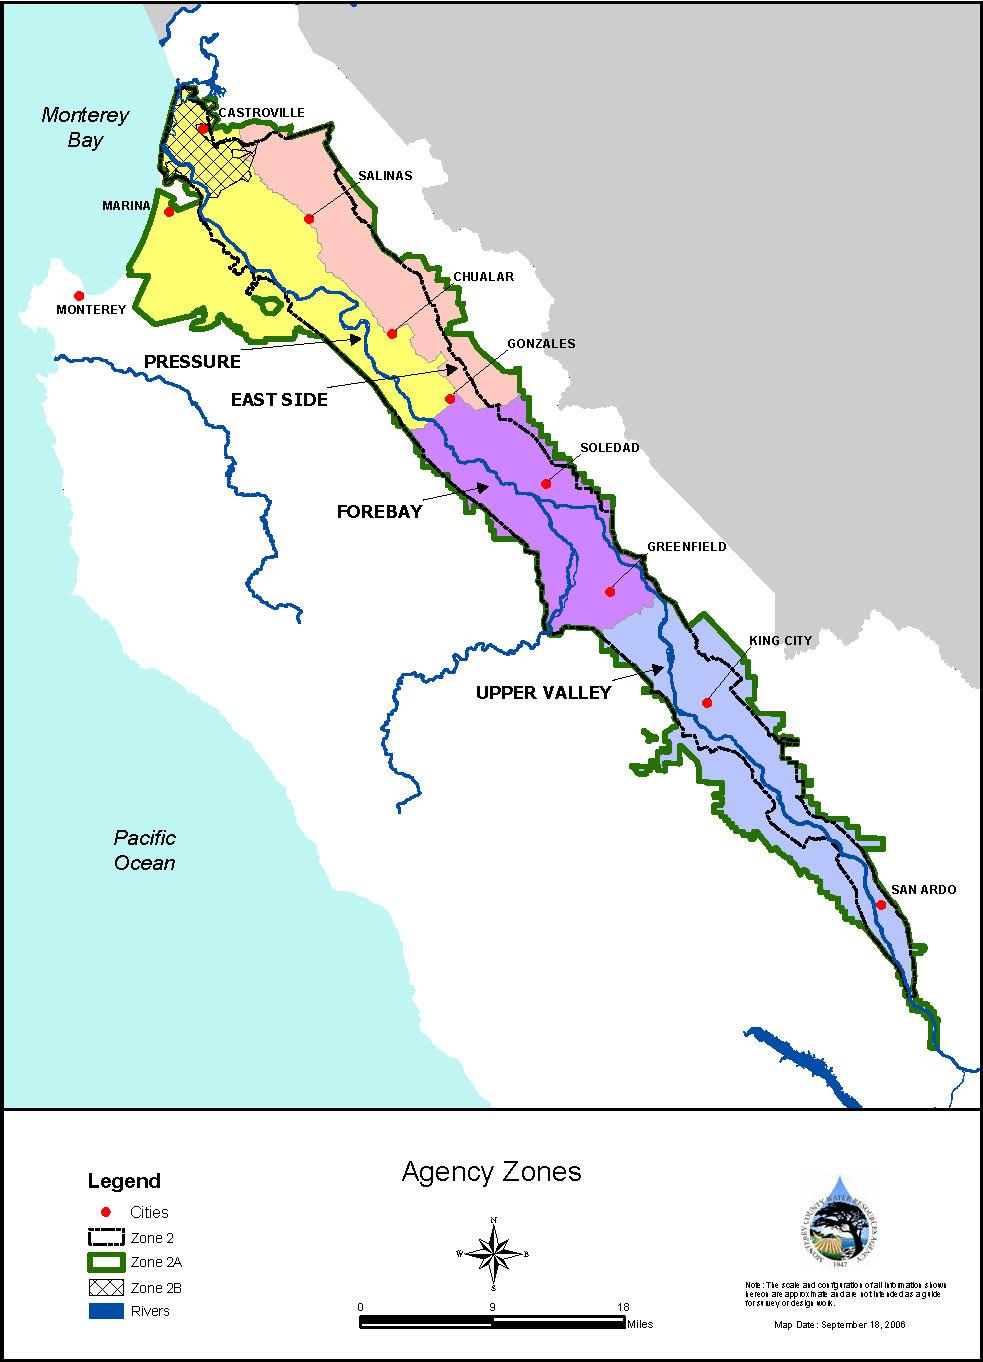 Ground Water Extraction Data Summary The Salinas Valley Ground Water Basin is divided into four hydrologic subareas whose boundaries are derived from discernible changes in the hydrogeologic